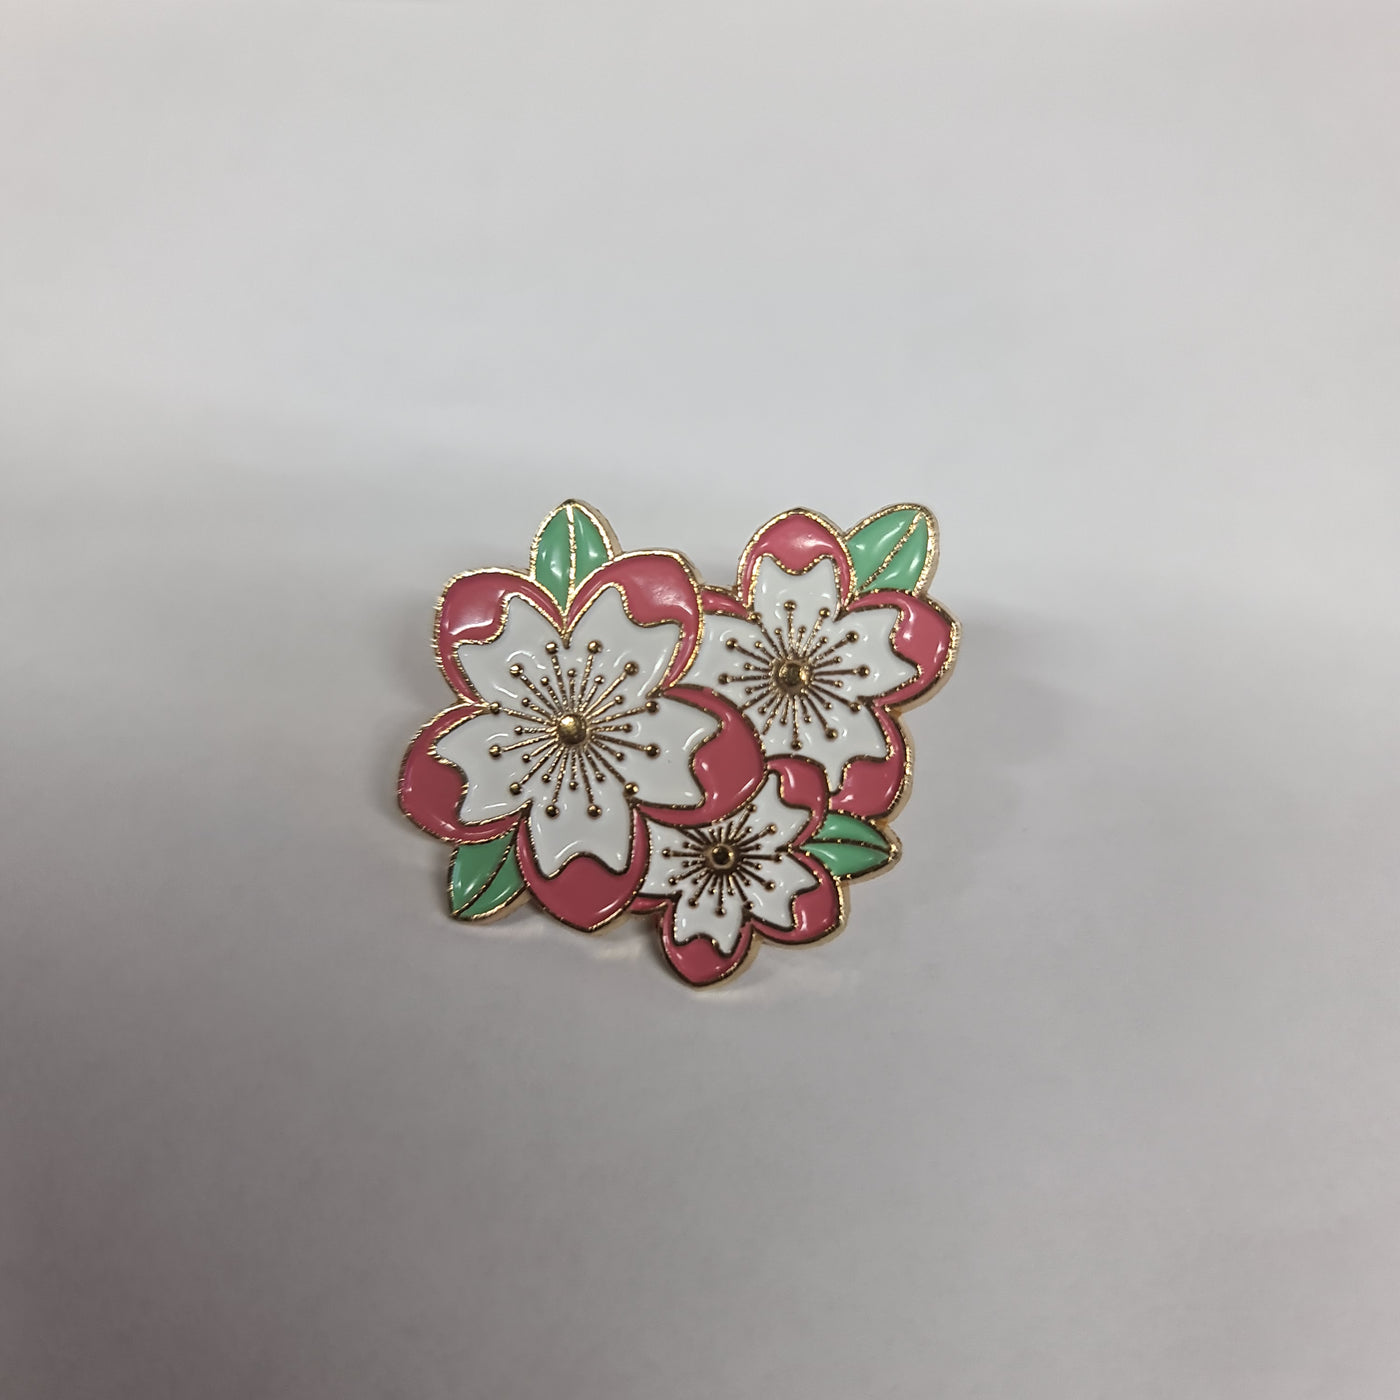 SOME Badge Pink/white 3 Flowers Blossom